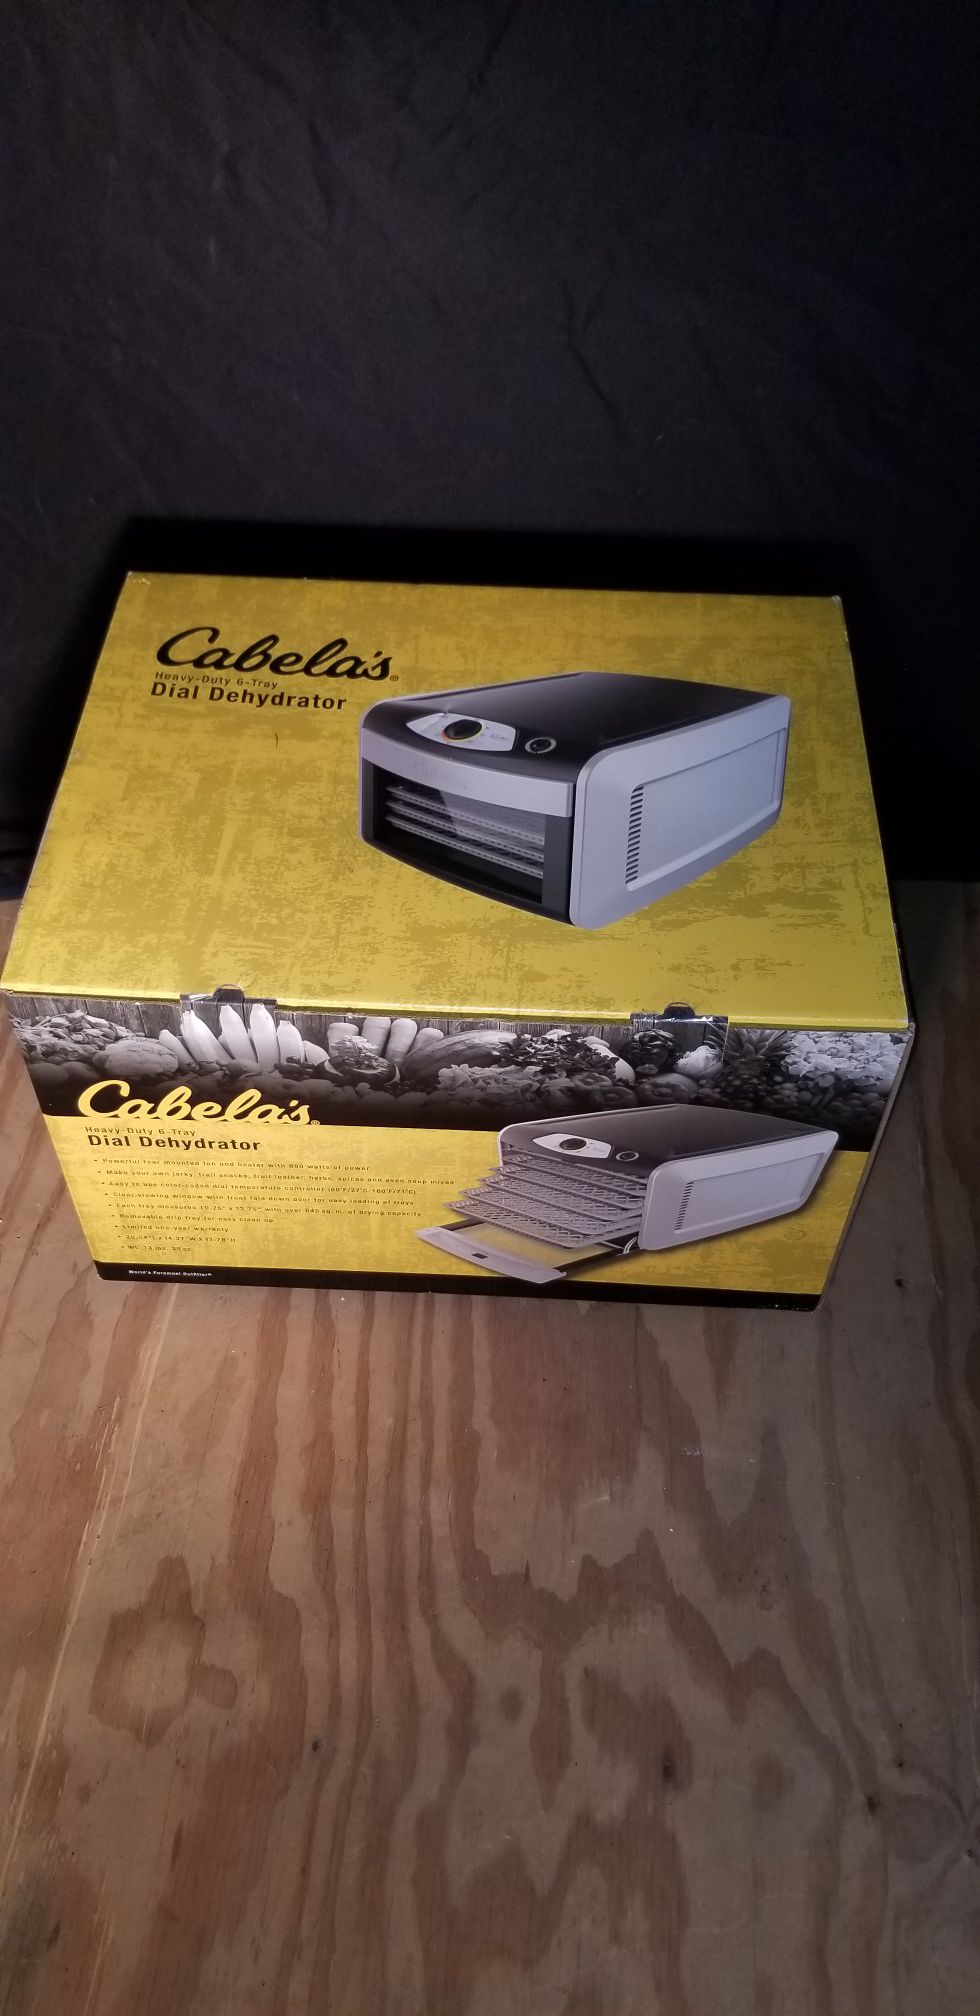 New Cabela's Dial Dehydrator. New in box $110